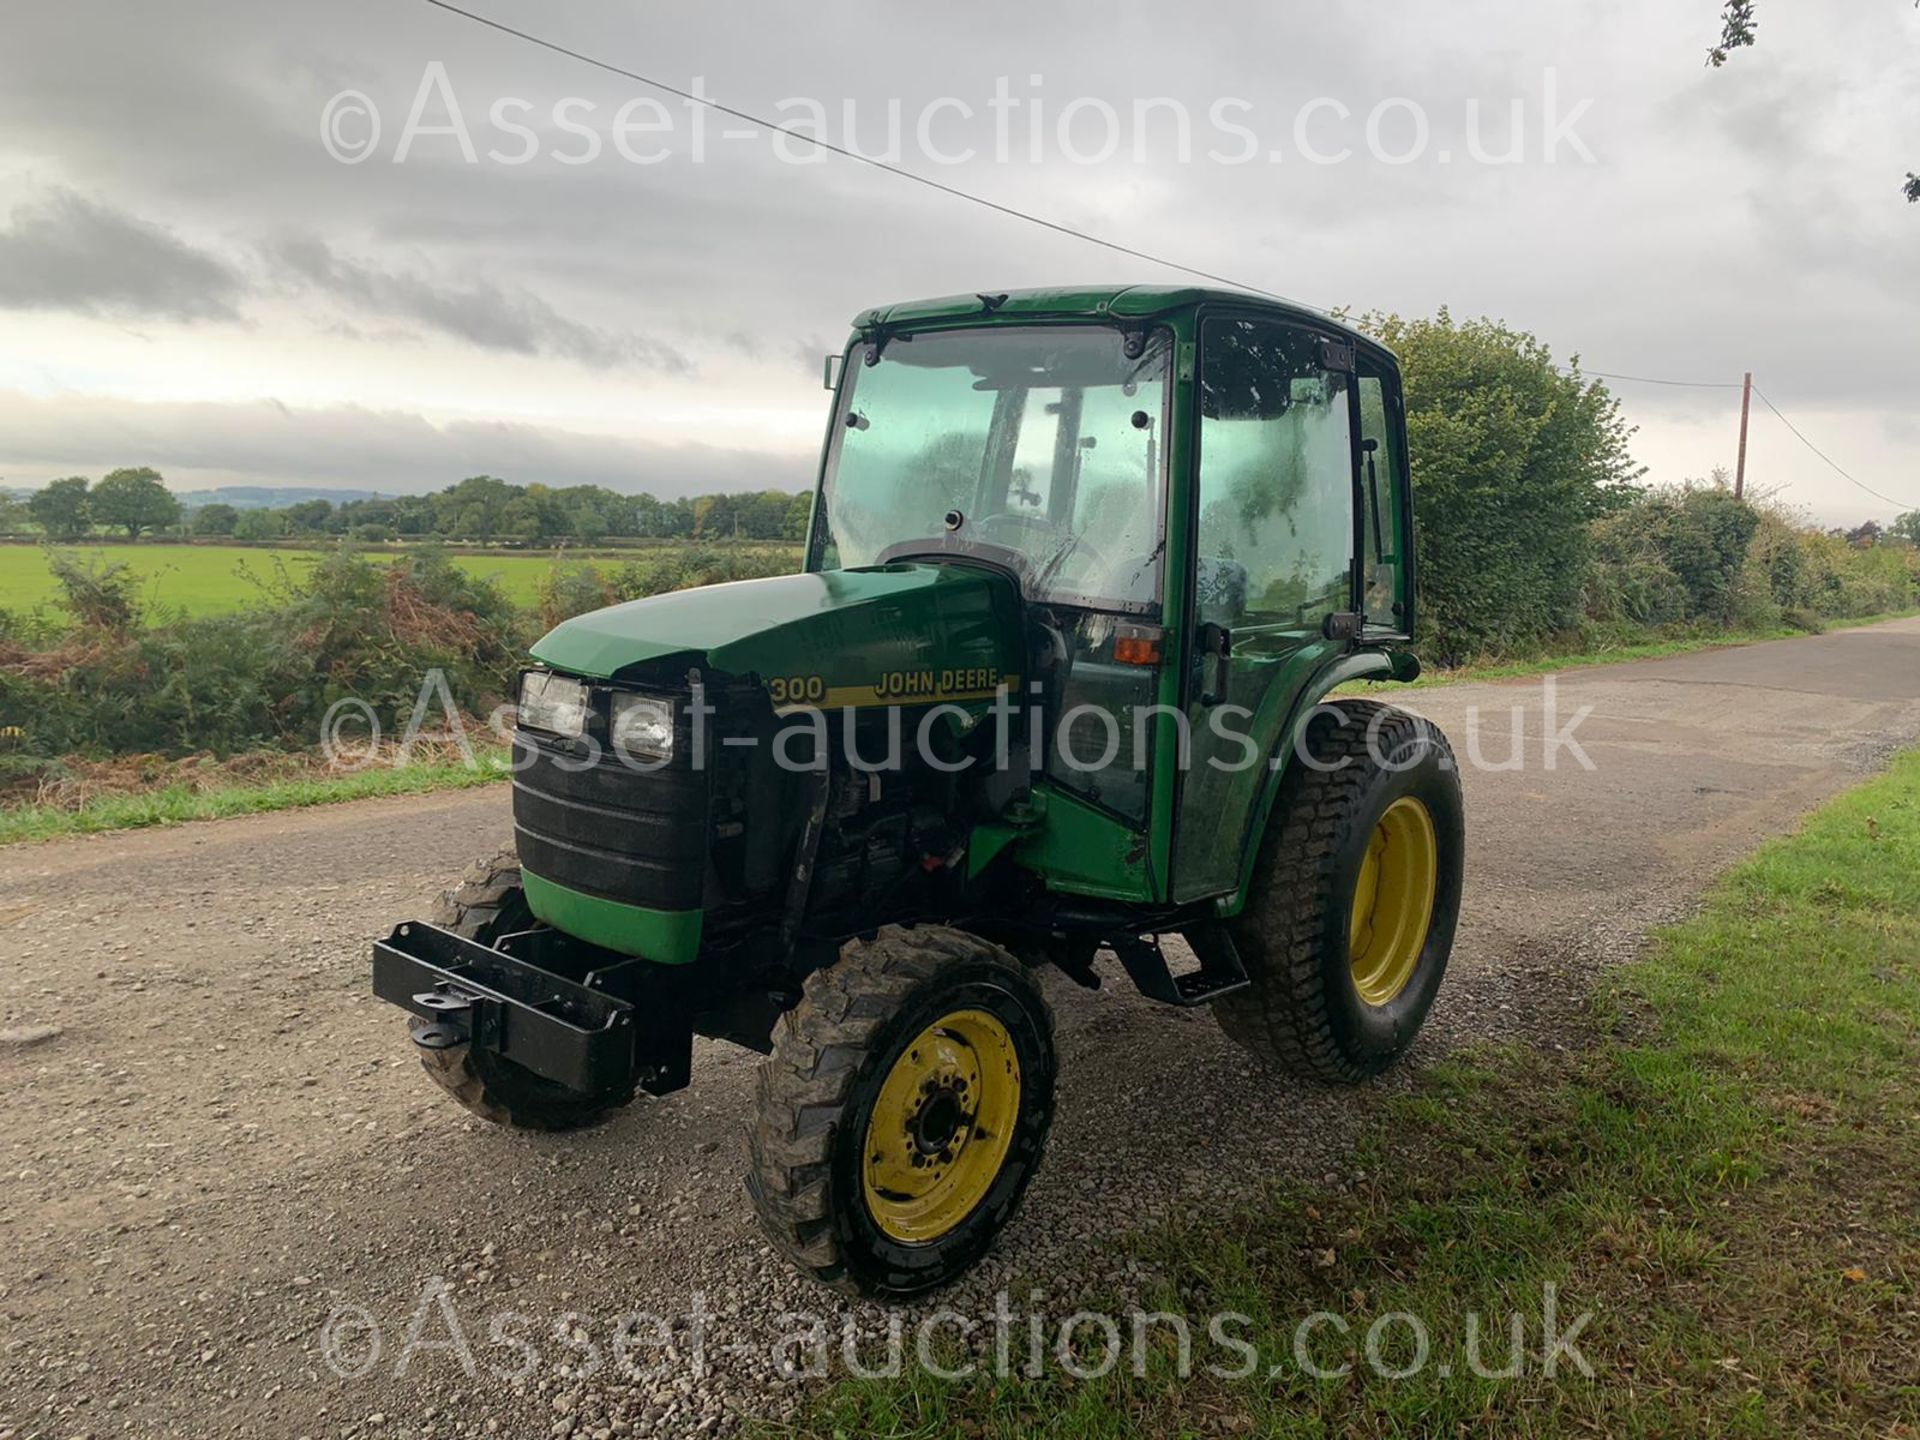 JOHN DEERE 4300 32hp 4WD COMPACT TRACTOR, RUNS DRIVES AND WORKS, CABBED, REAR TOW, ROAD KIT - Image 3 of 9